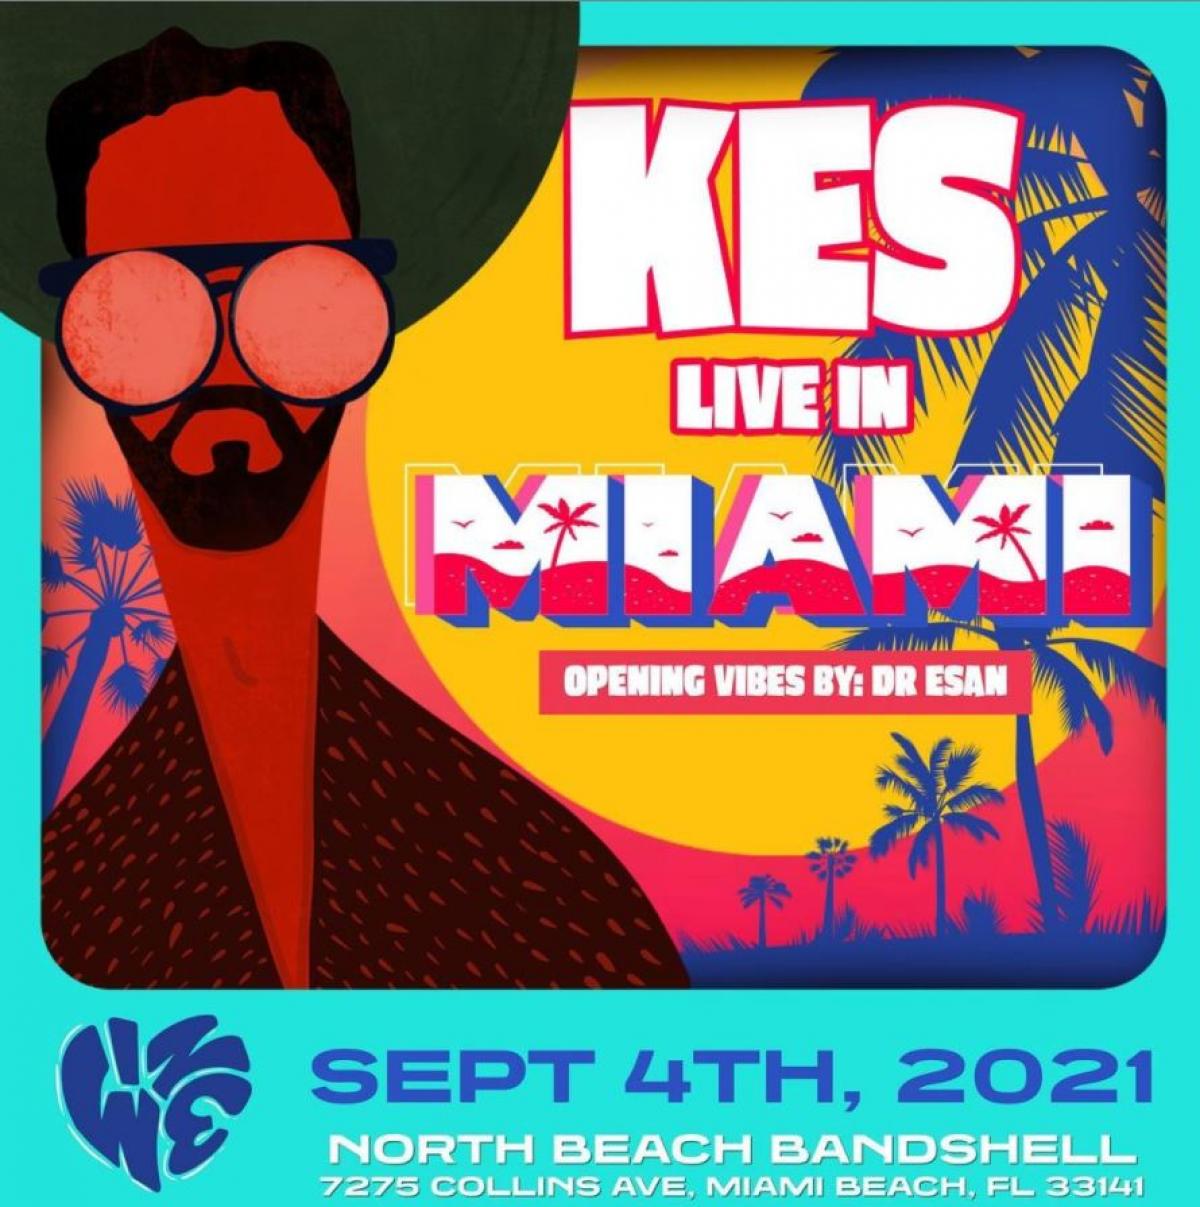 Kes The Band Live In Miami flyer or graphic.